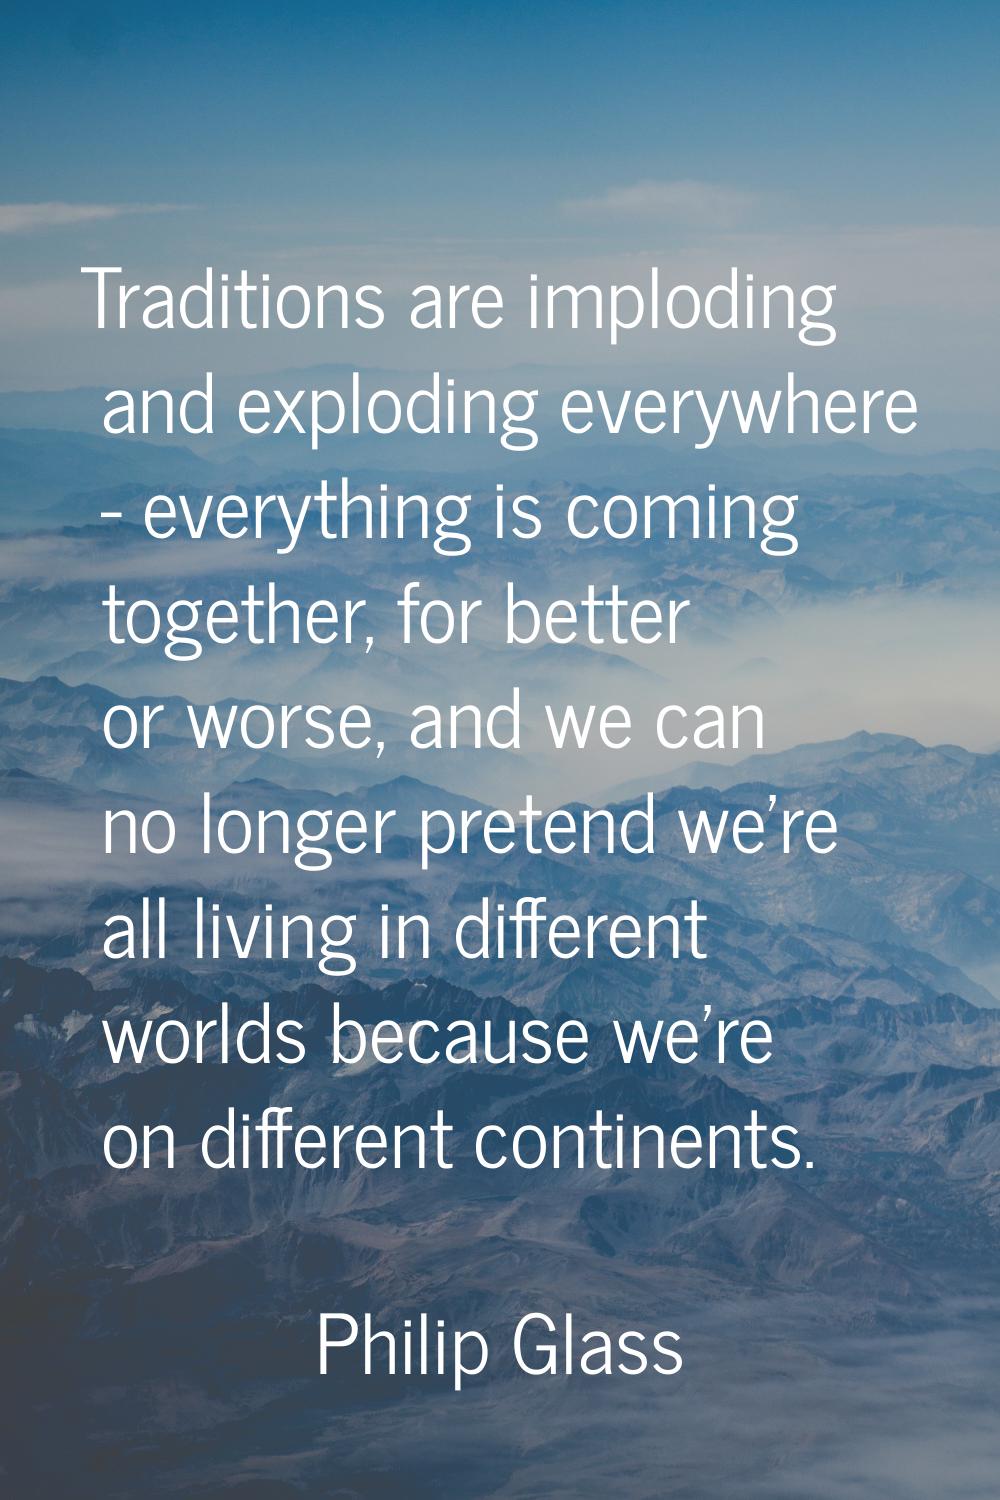 Traditions are imploding and exploding everywhere - everything is coming together, for better or wo